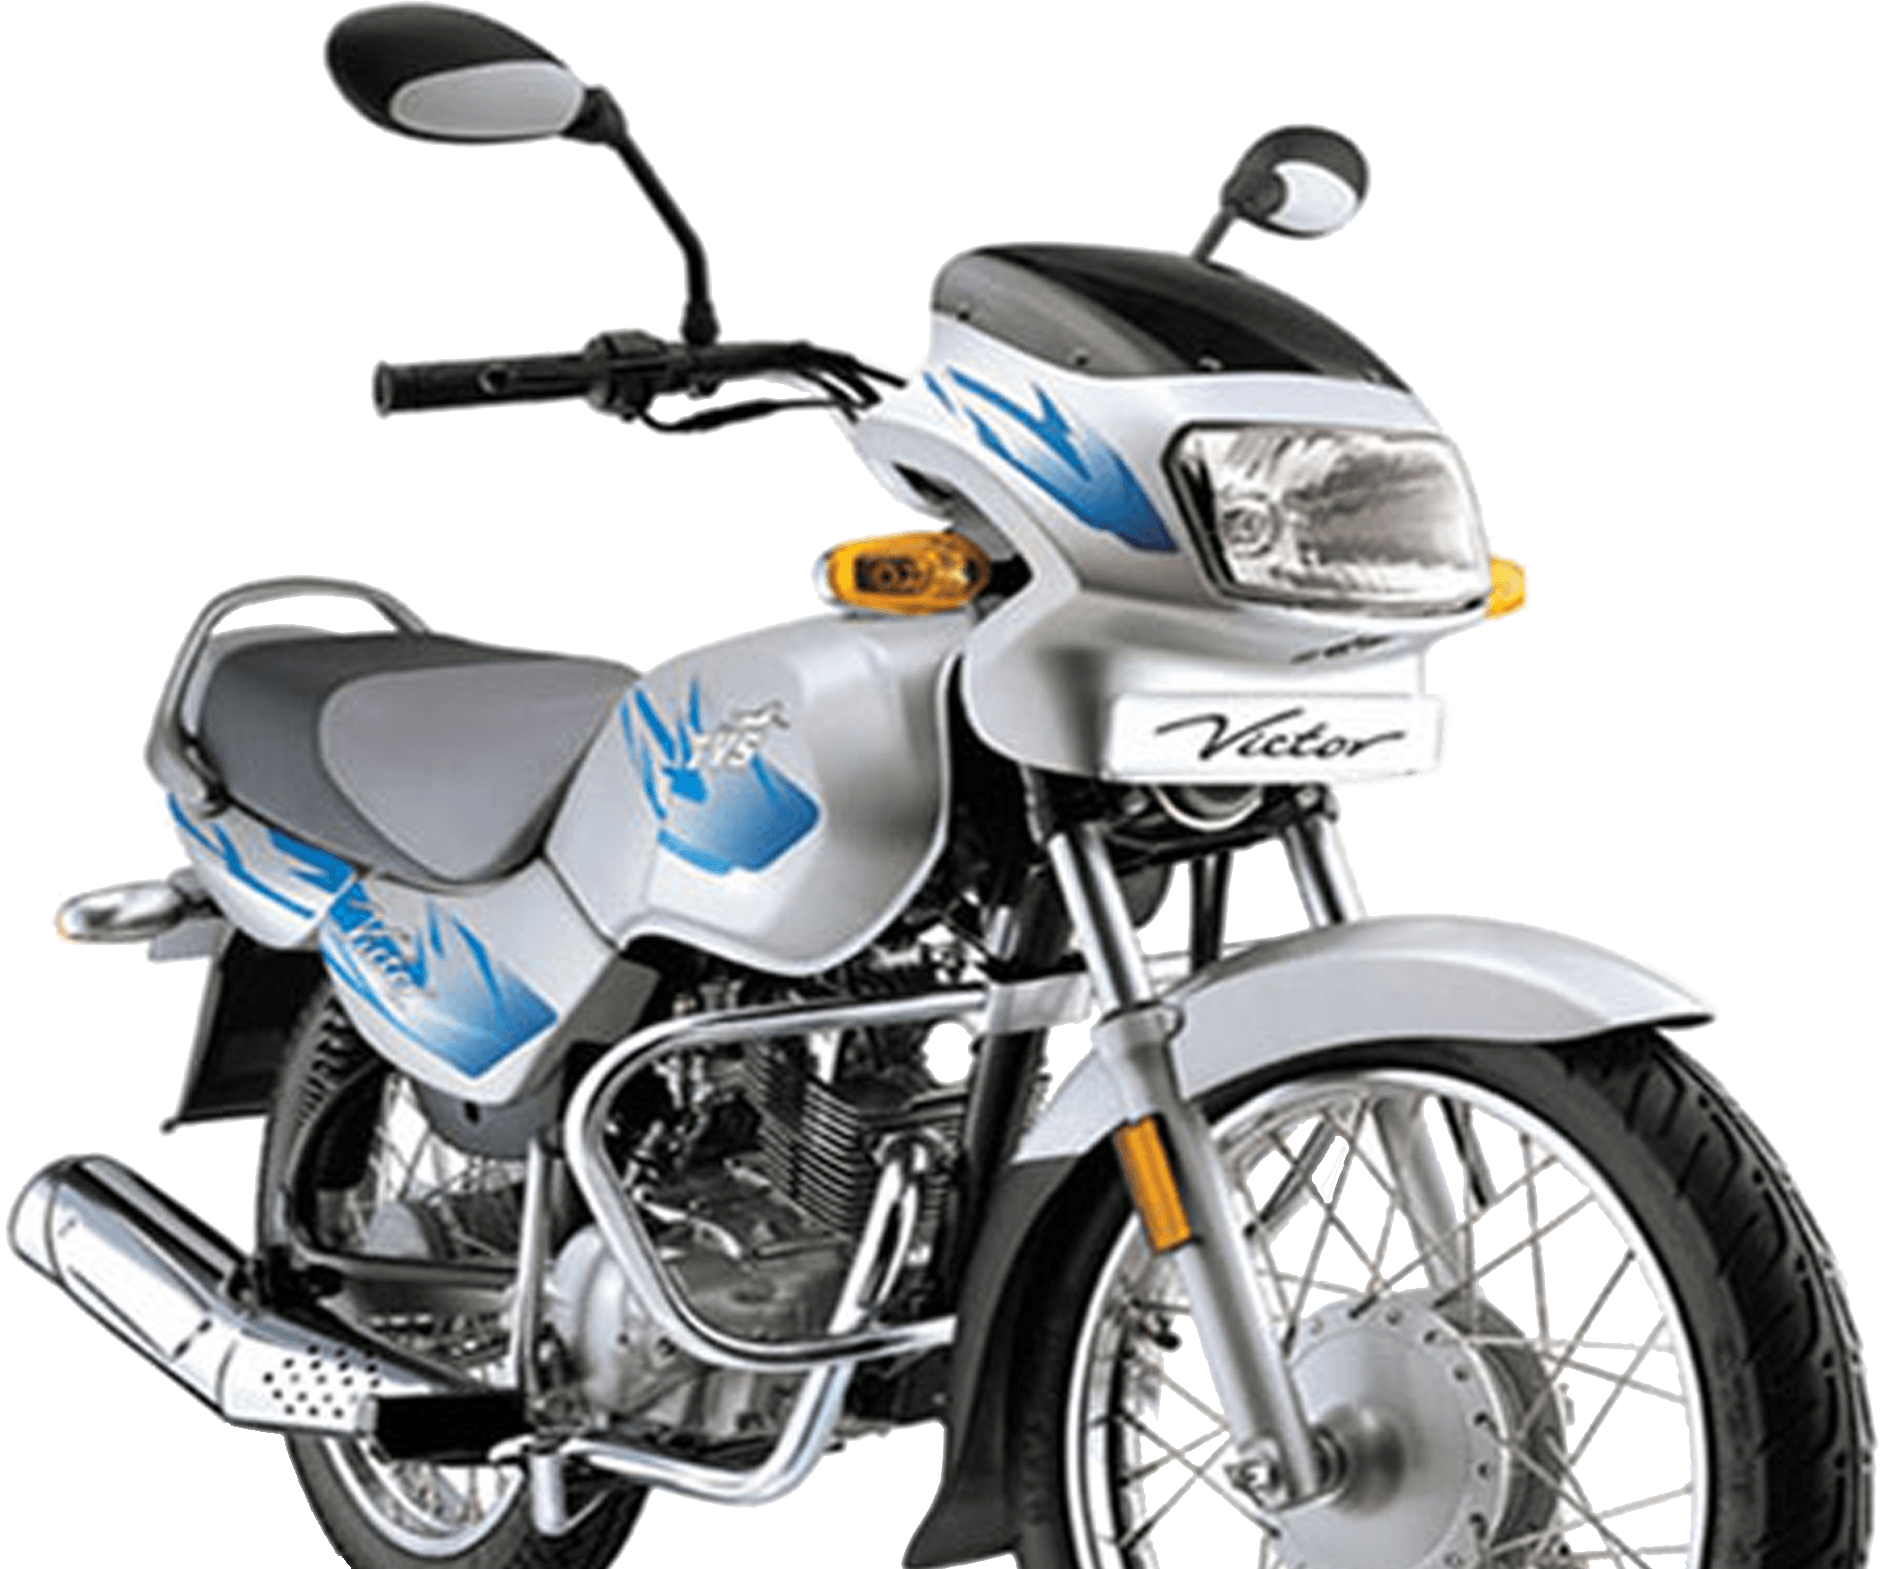 TVS VICTOR GLX Photo, Image and Wallpaper, Colours